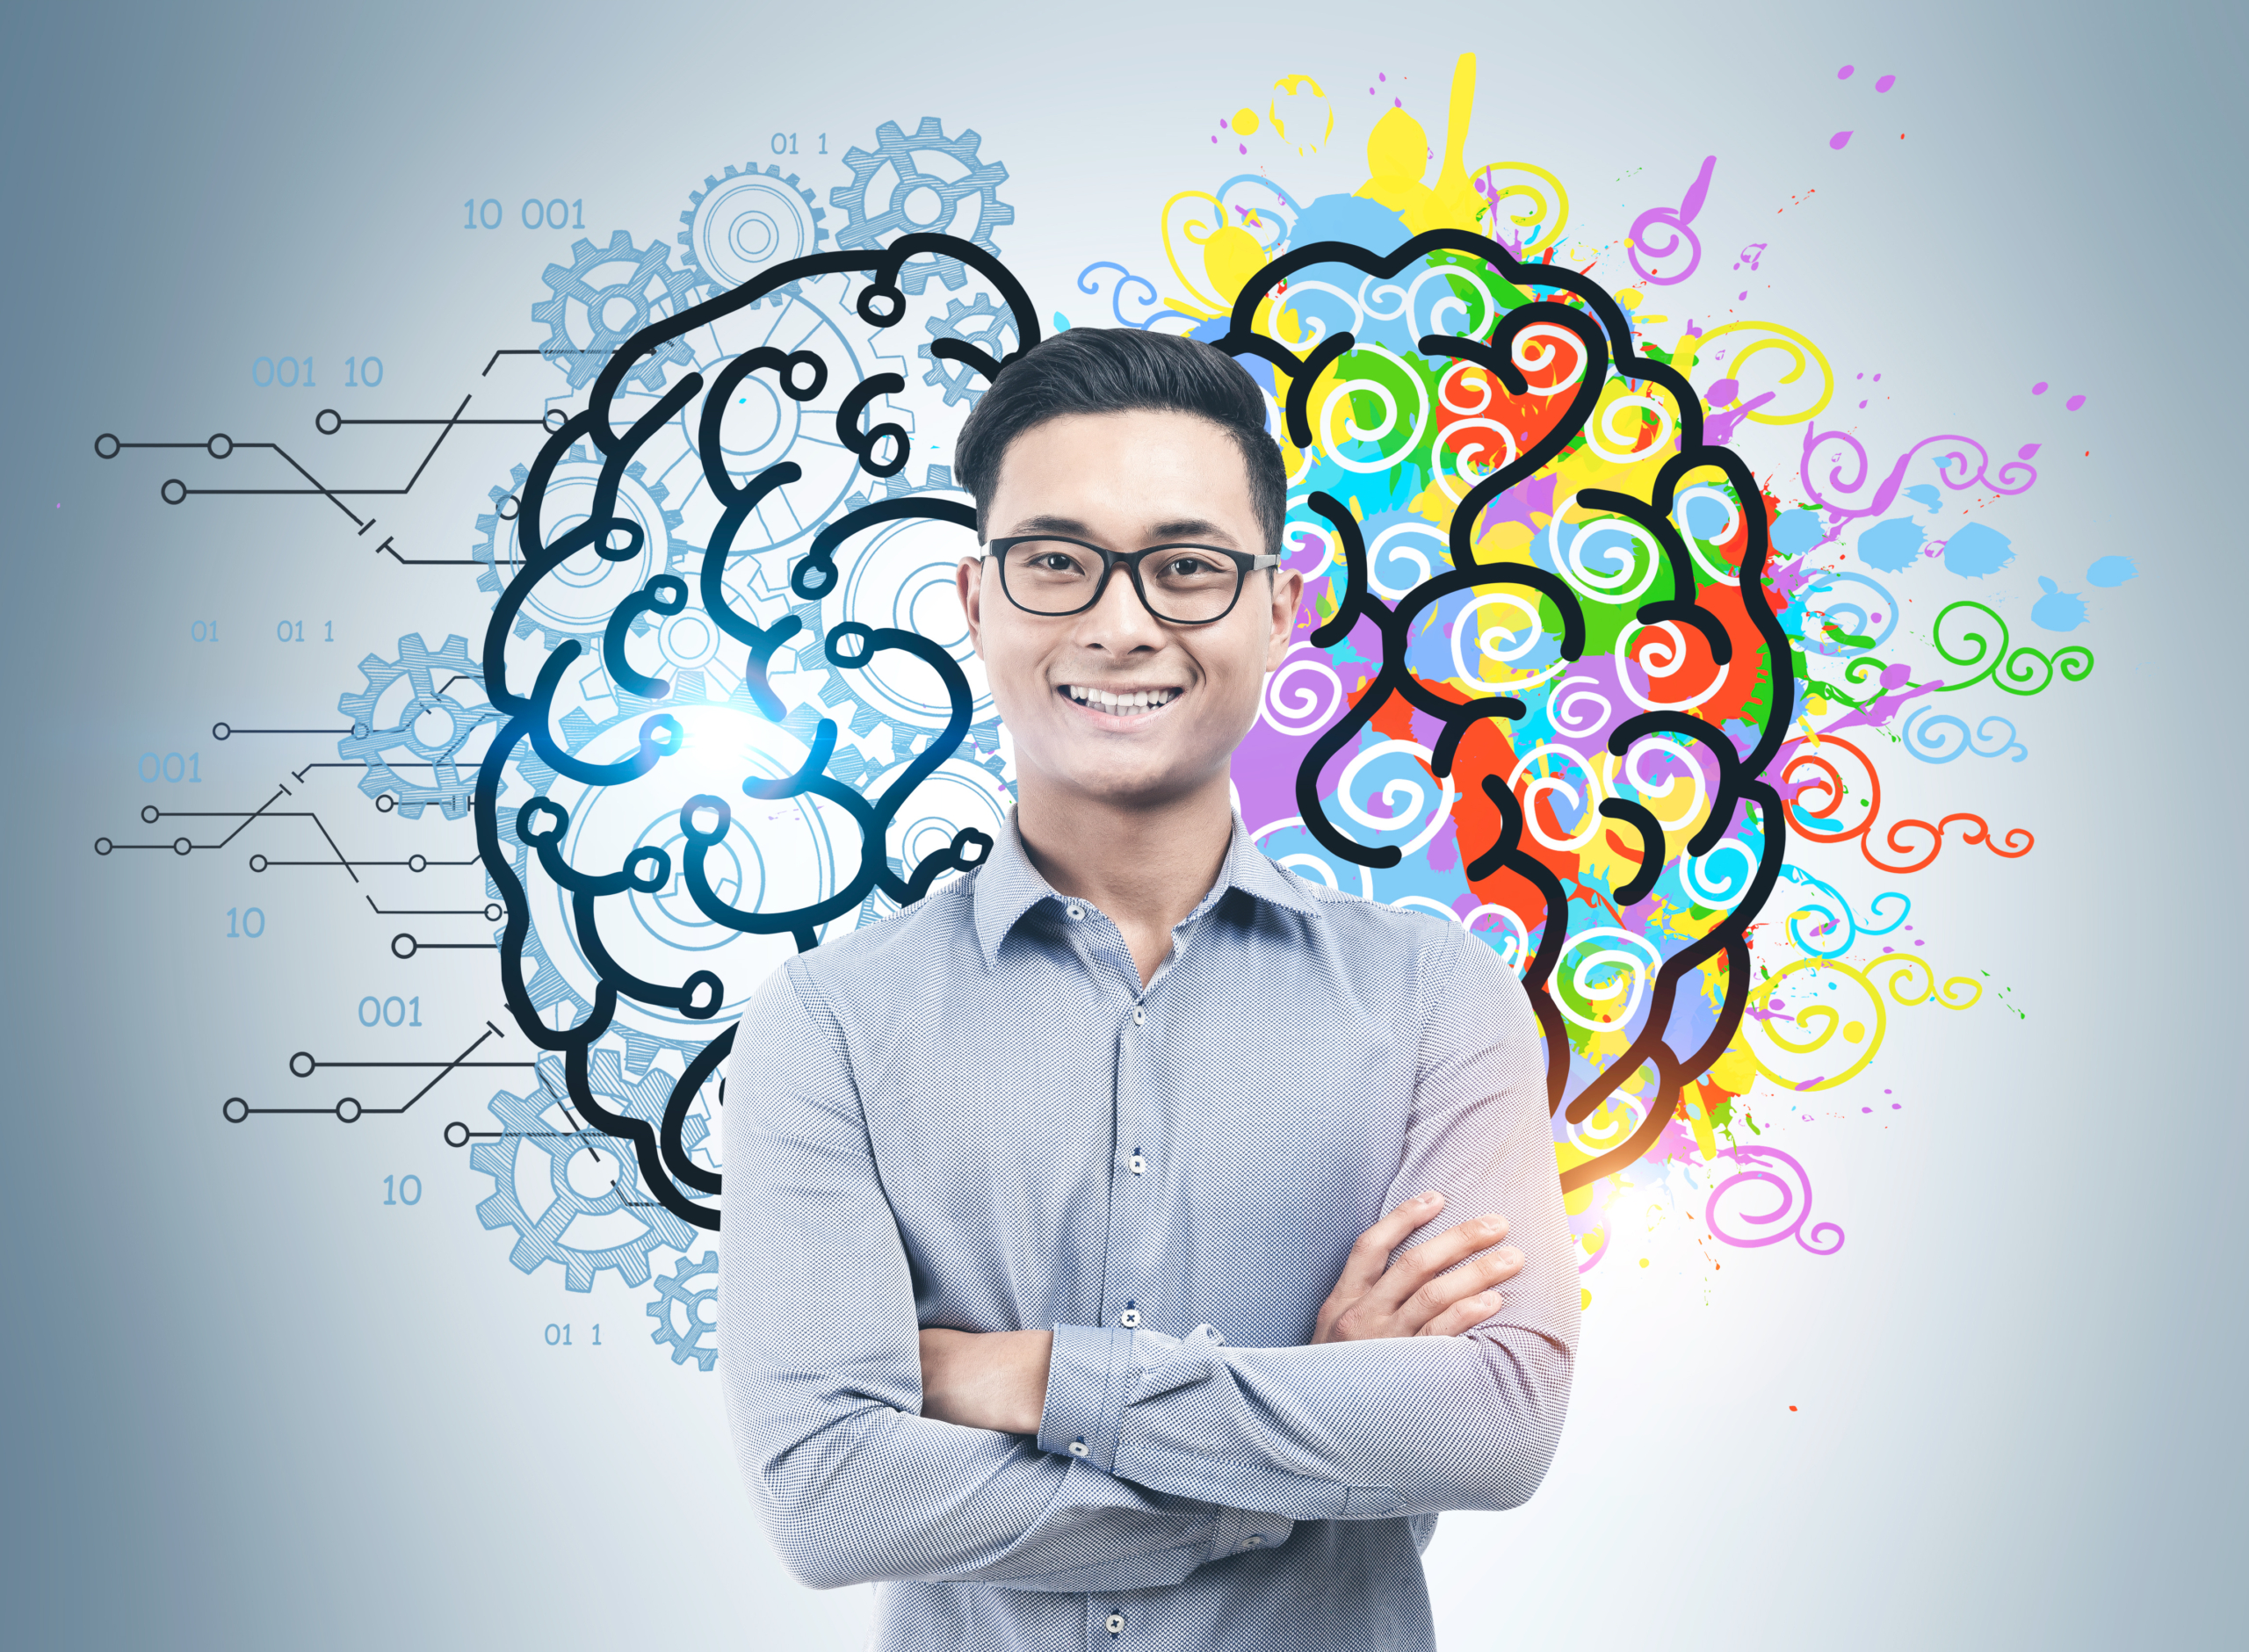 A man in a button down shirt smiles for the camera. In the background, a drawing of a brain with the right side showing splashes or color for creativity. The left side gears representing processing. Emotional Intelligence (EI)